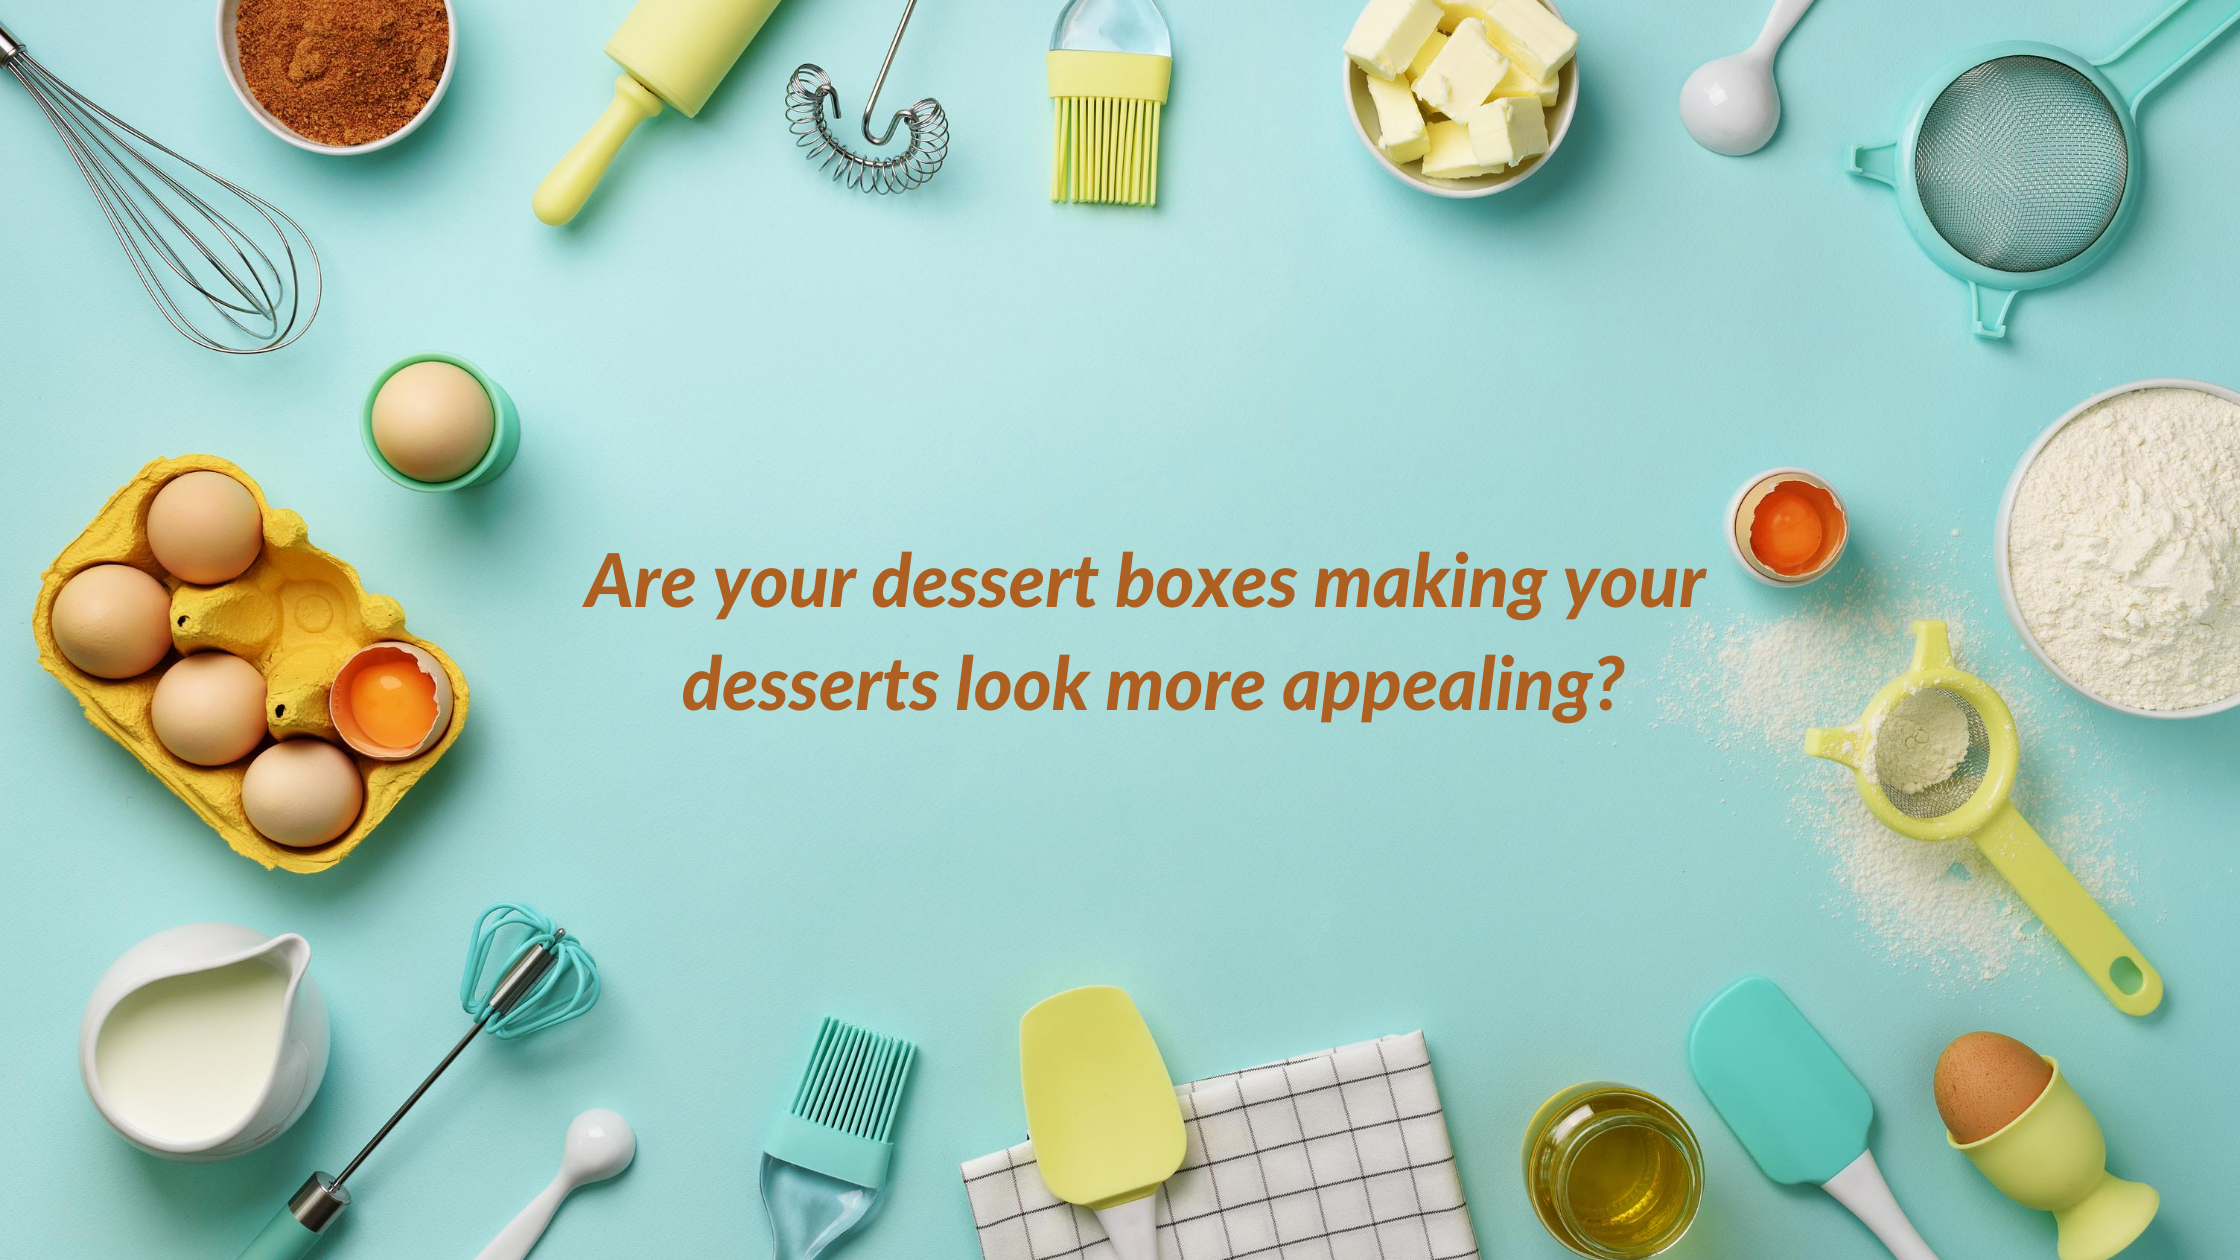 Are your dessert boxes making your desserts look more appealing?